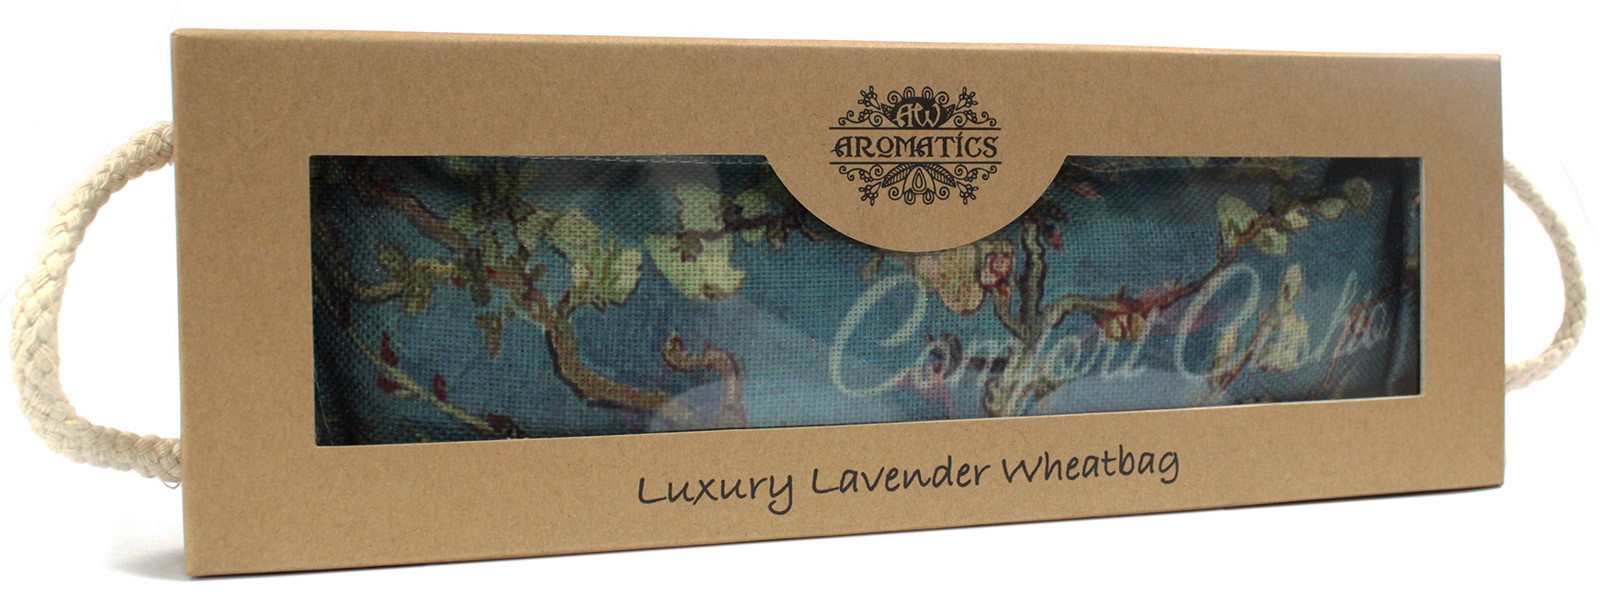 Luxury Lavender Wheat Bag in Gift Box - Blossom